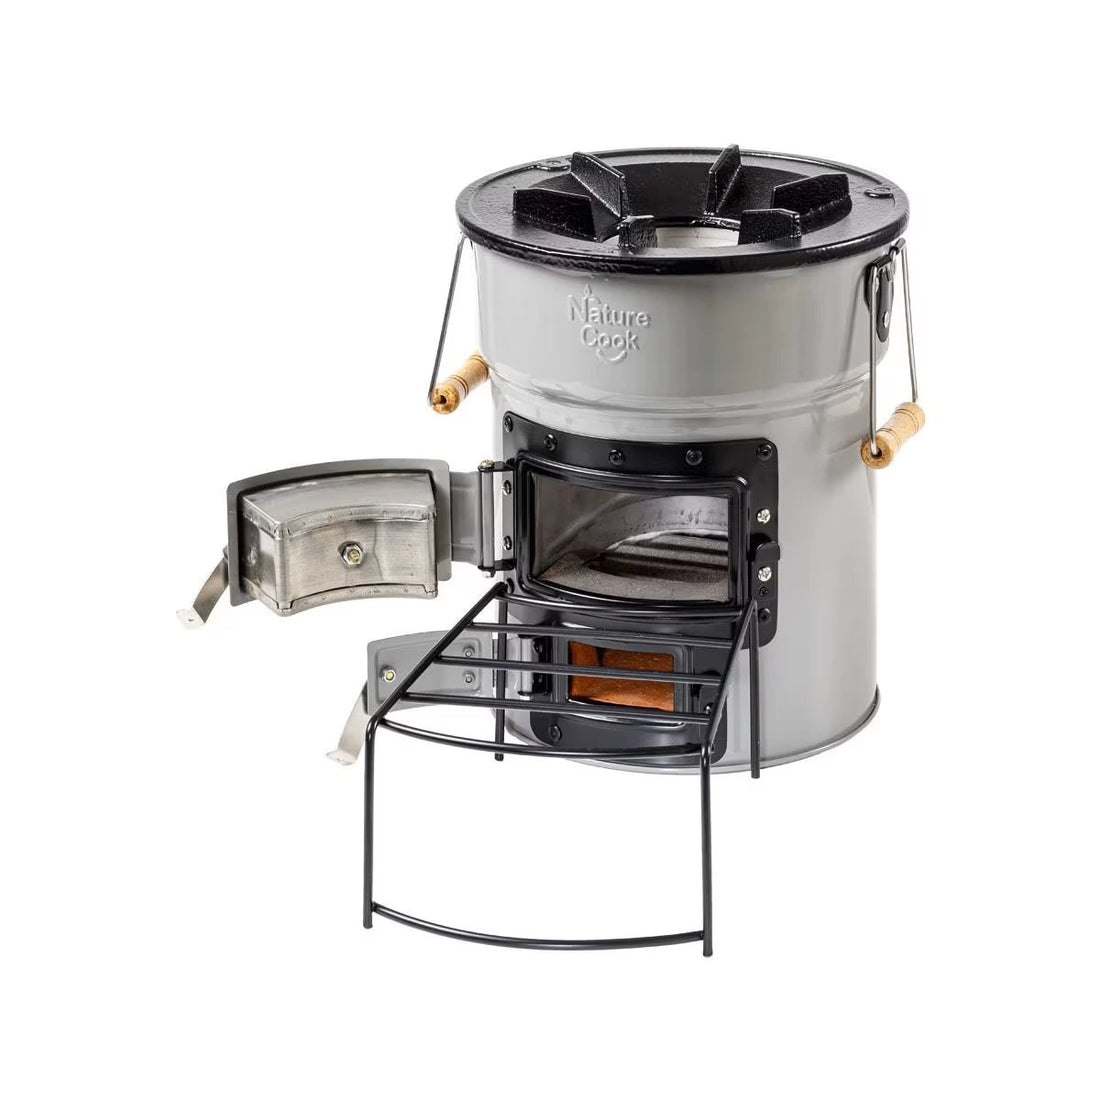 Nature Cook rocket oven - mobile stove